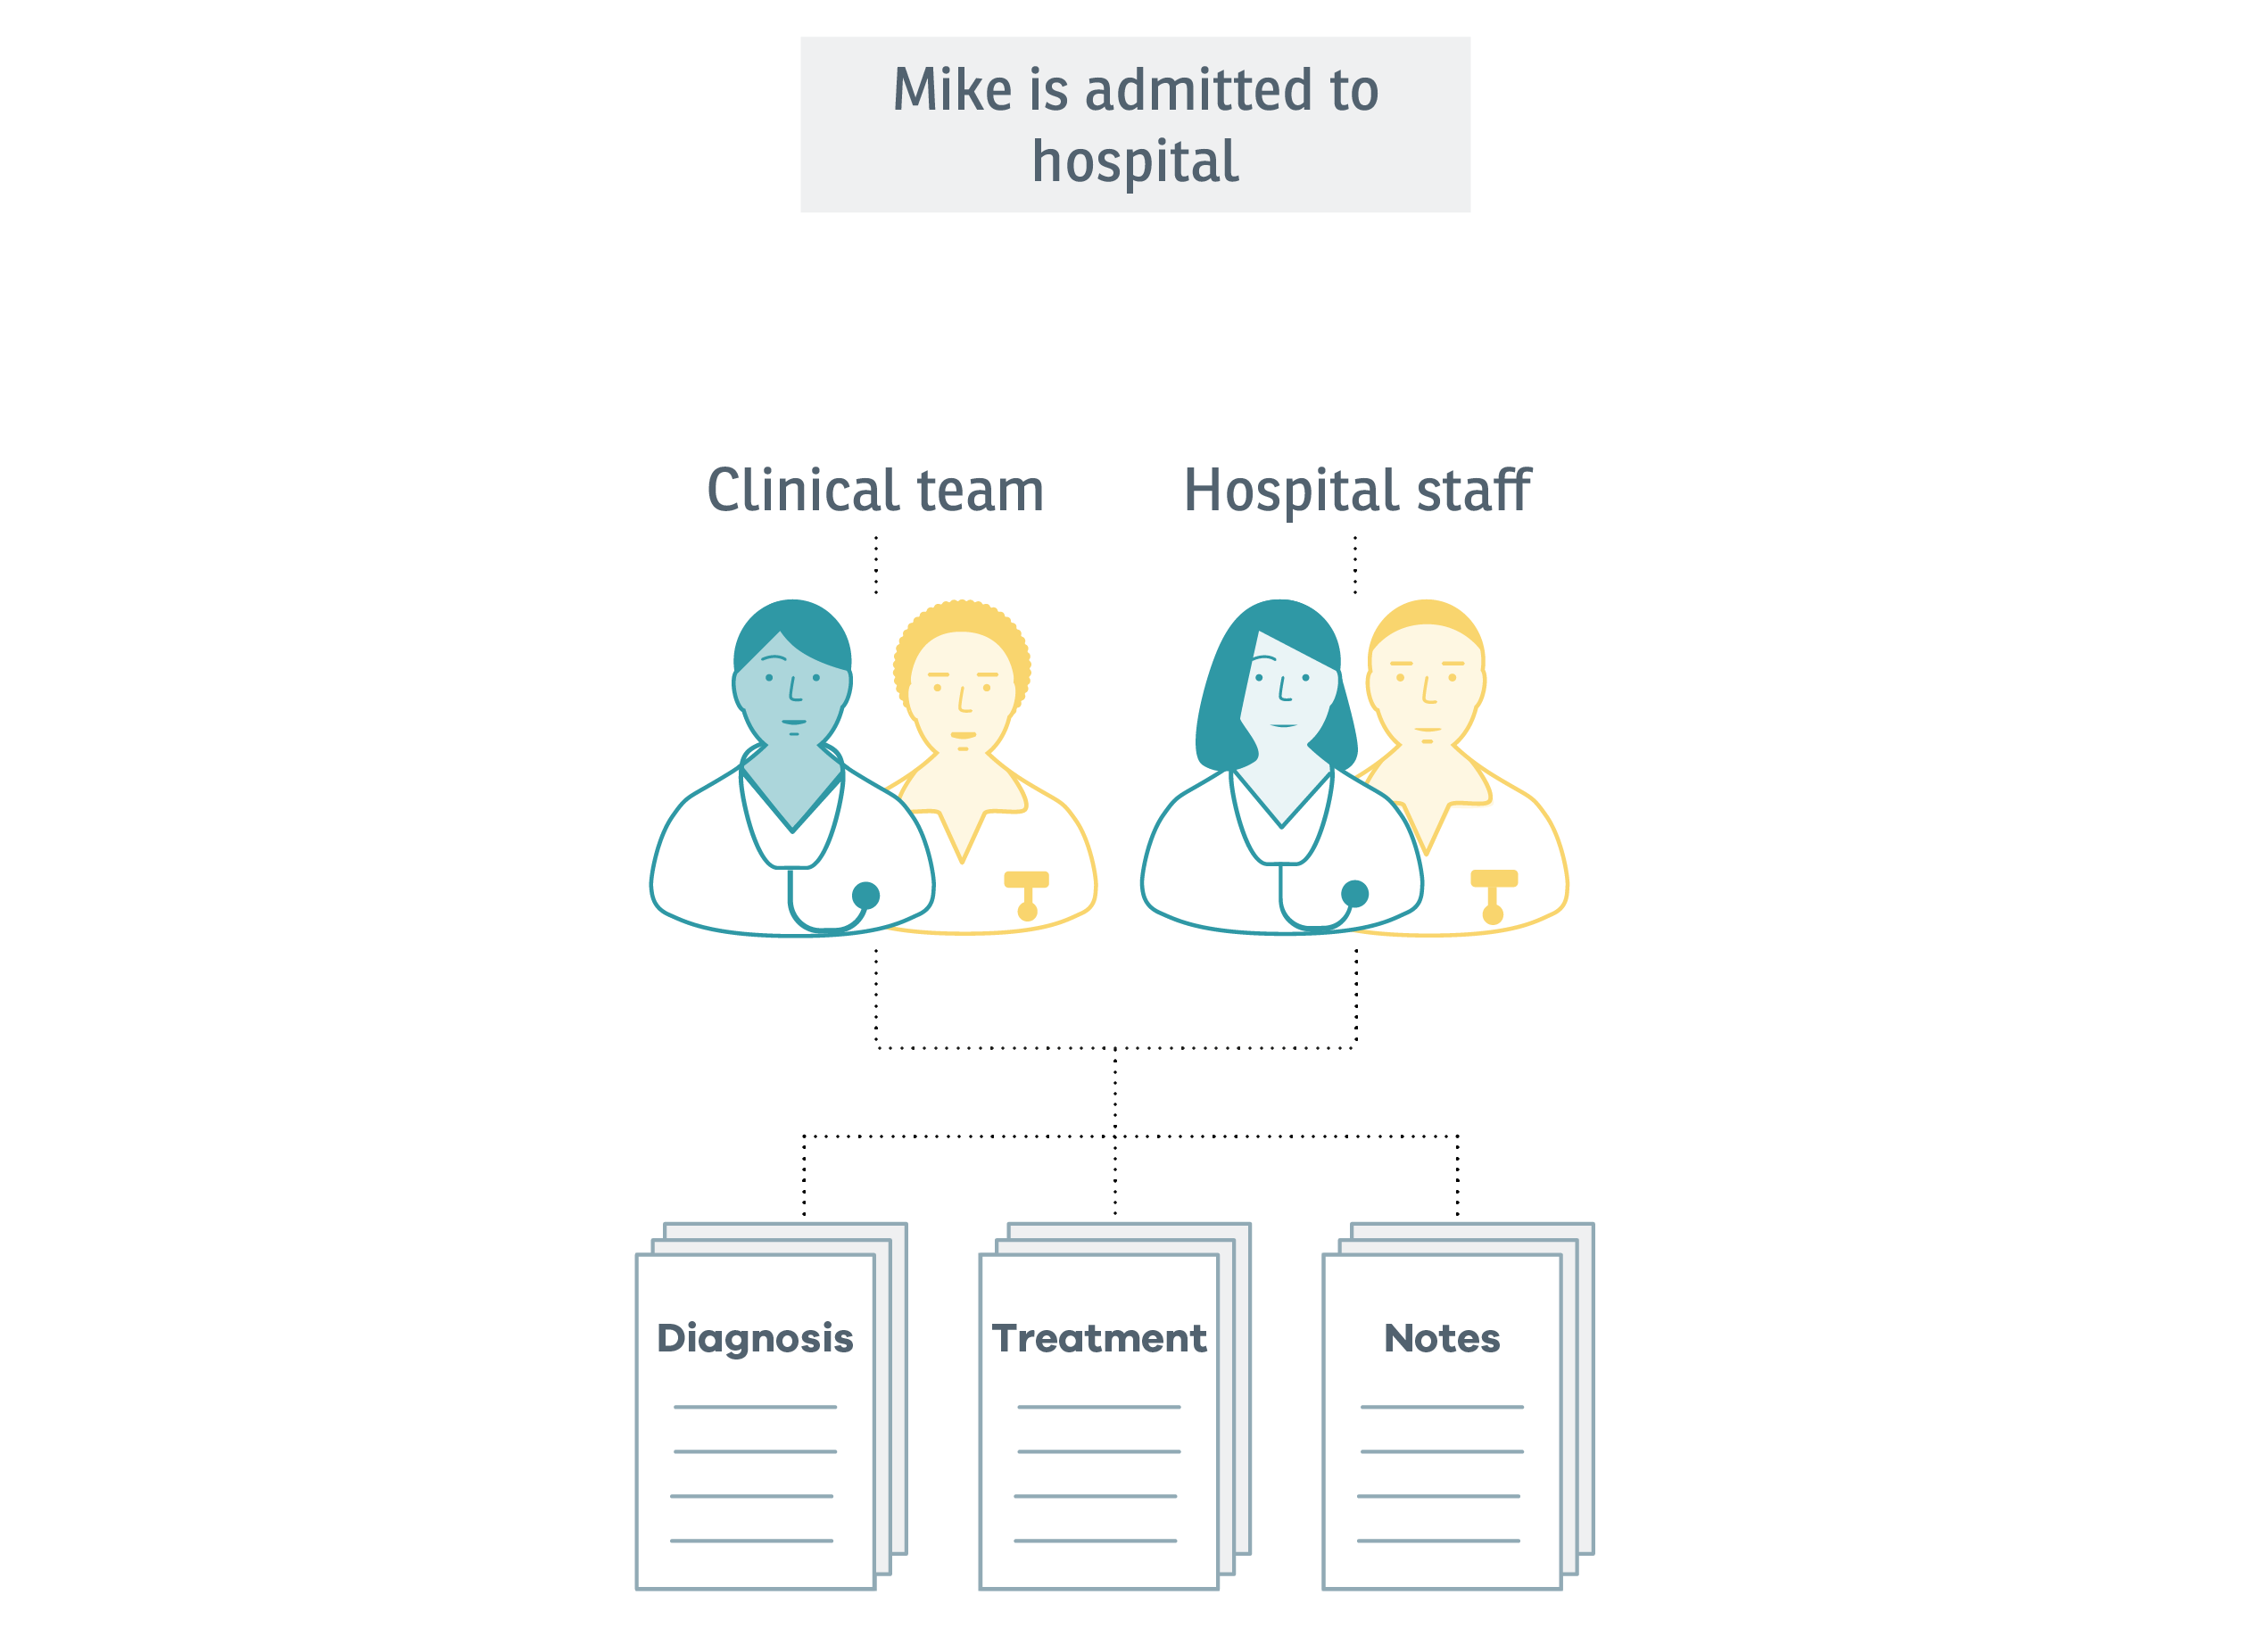 Experience map: Mike’s first hospitalisation. A diagram showing the clinical team and hospital staff and the information they add to for Mike’s care.